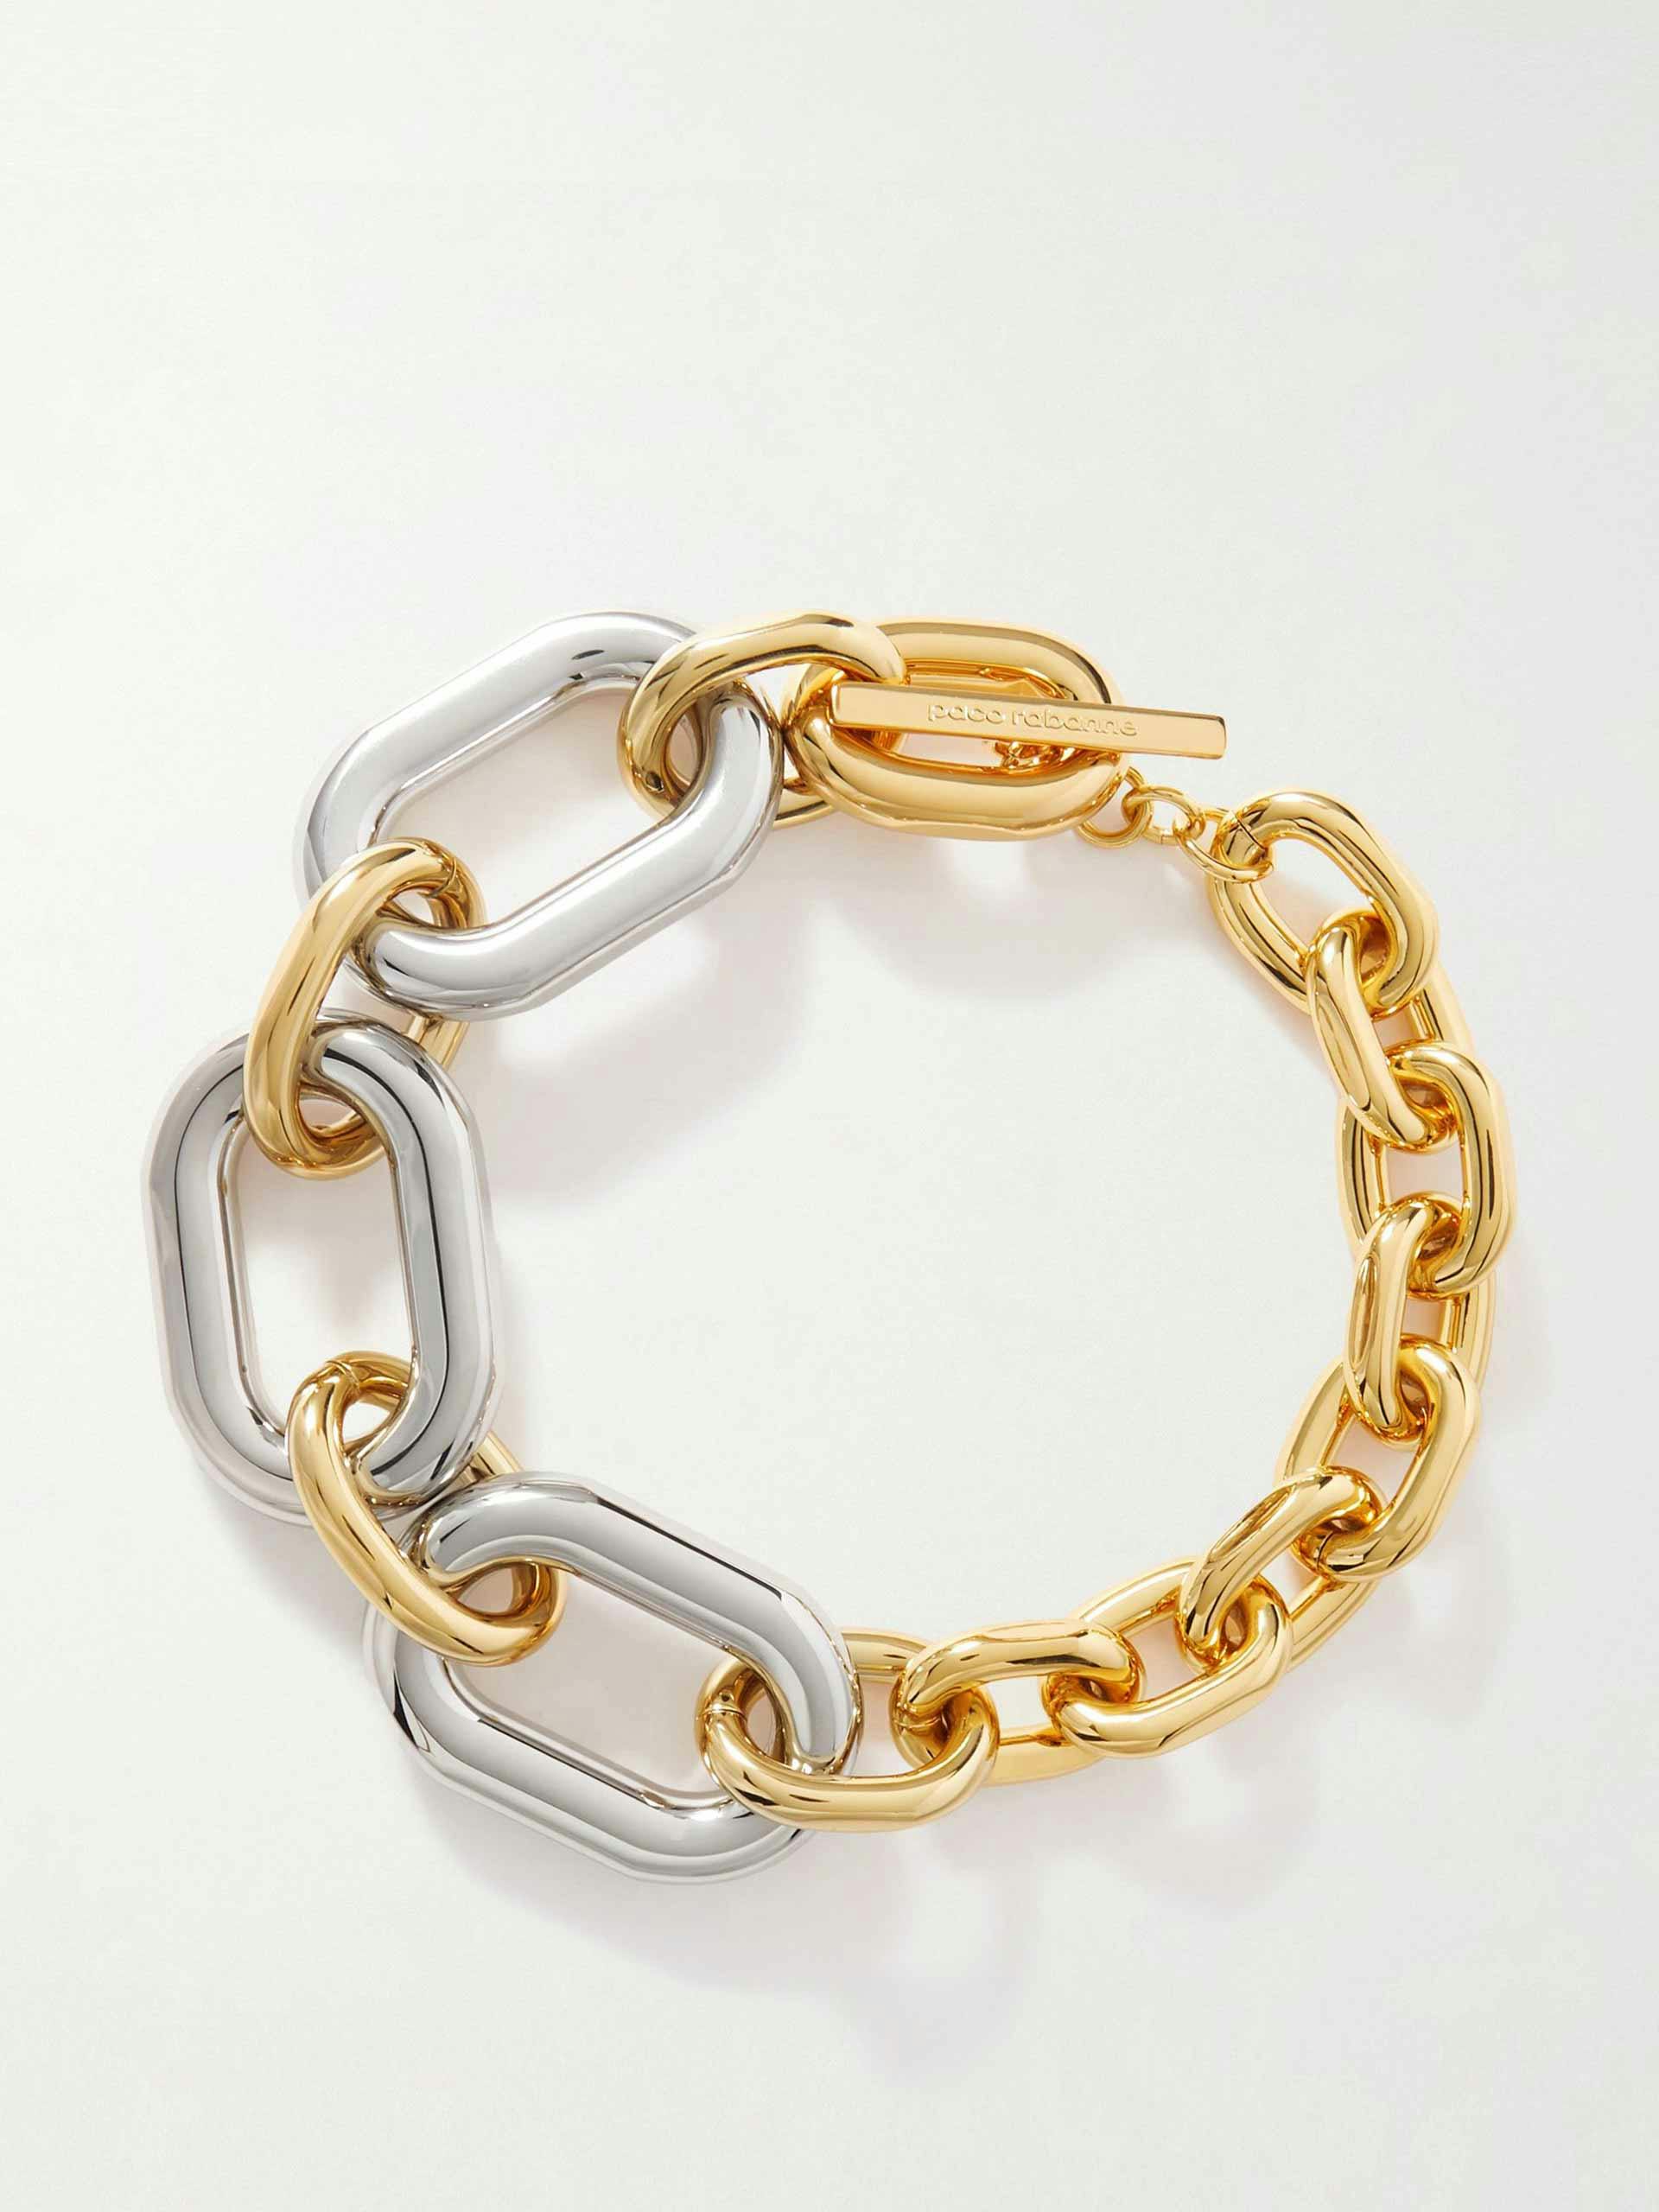 Silver- and gold-tone chain bracelet